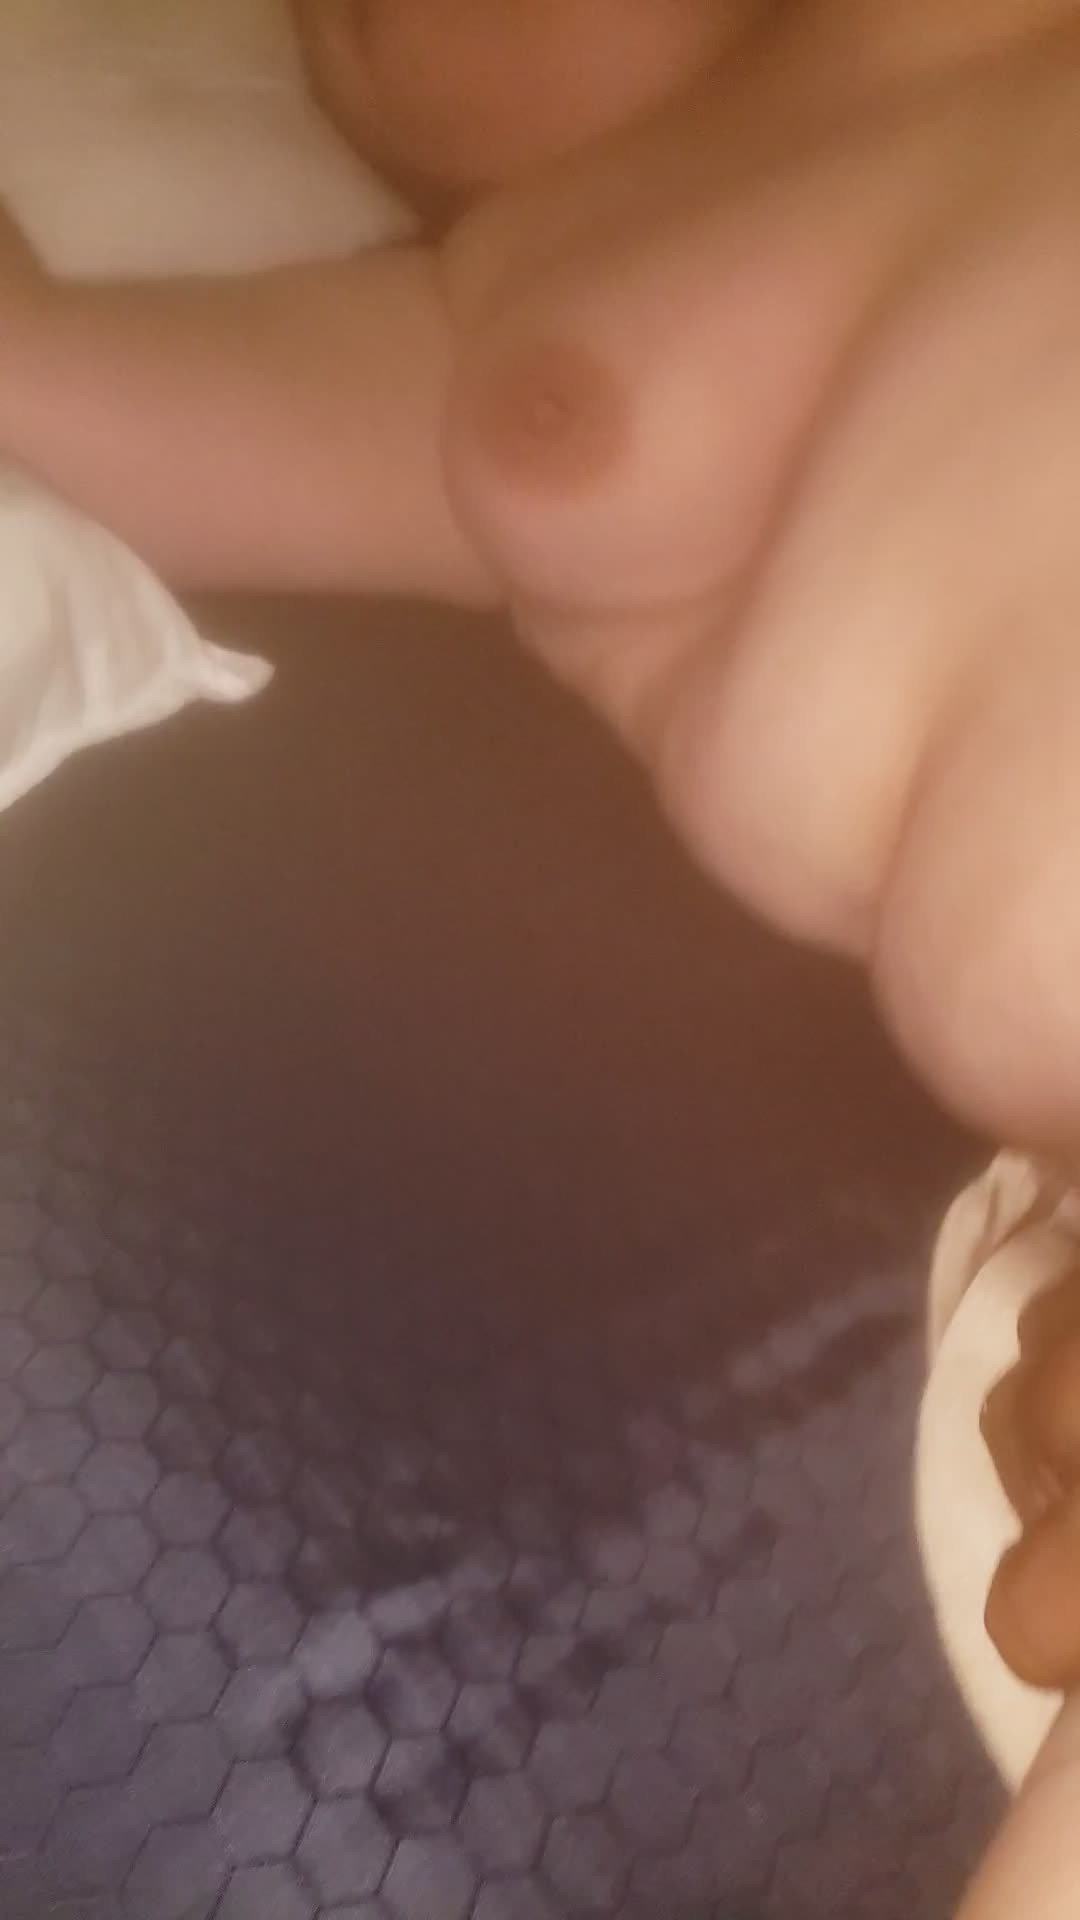 Video by Cotabota with the username @Cotabota,  August 23, 2021 at 11:29 AM. The post is about the topic BBC Cuckold and the text says 'somelne plz fuck me snapchat Bigdeal_94 or txt 8126060921'